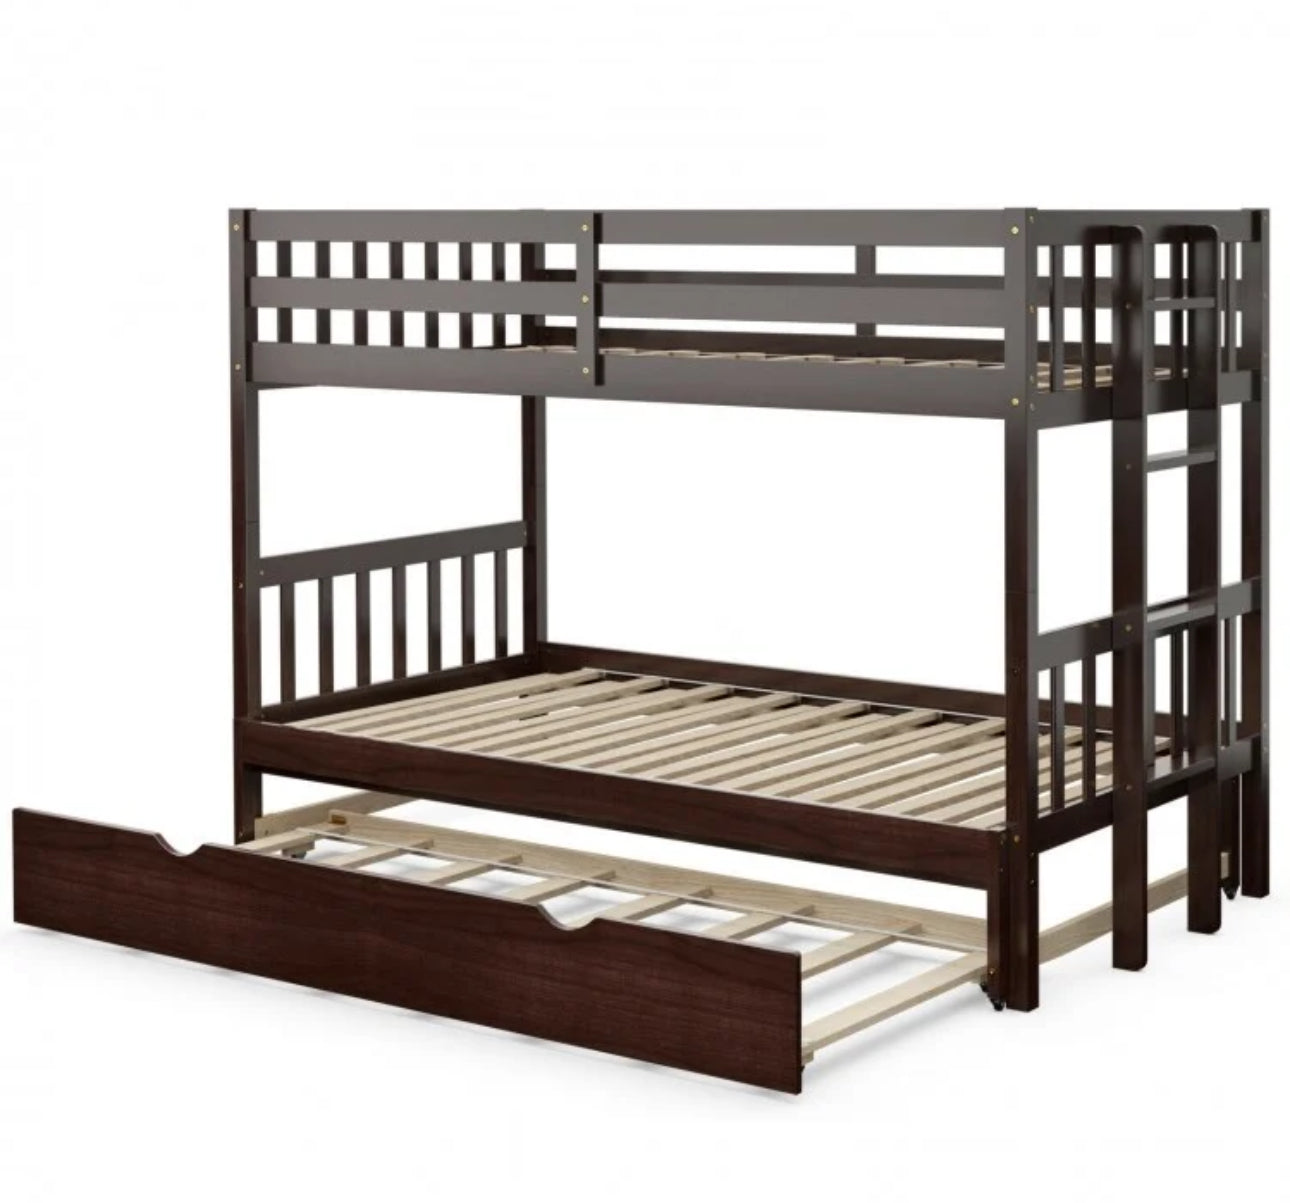 Heavy Duty Modern 4-in-1 Design Twin Pull-Out Bunk Bed With Trundle Wooden Ladder | High Guardrail | Sturdy Bed Board